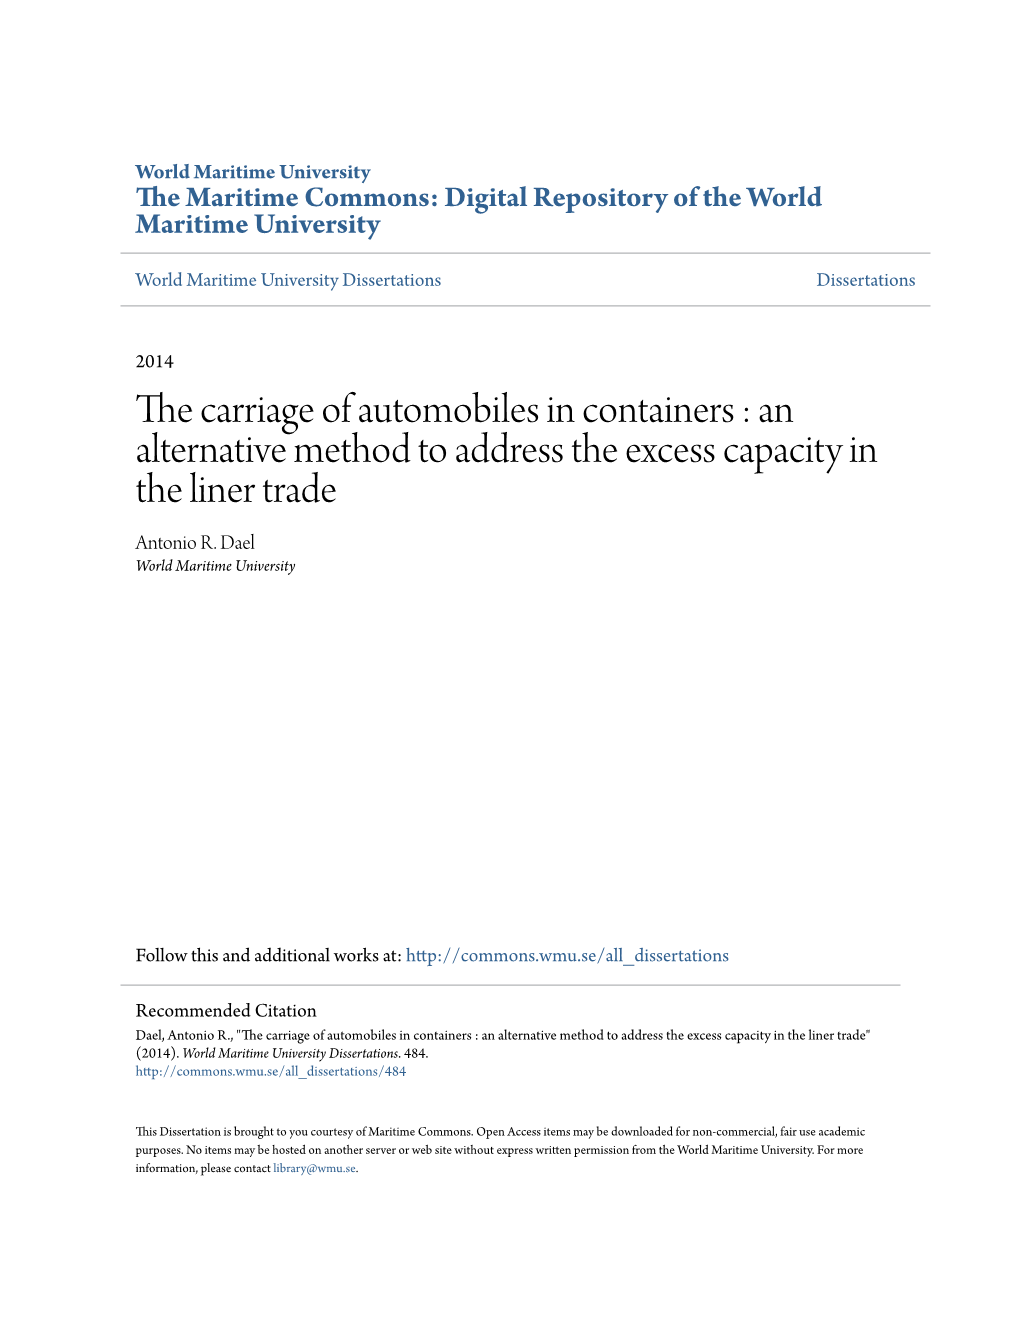 The Carriage of Automobiles in Containers : an Alternative Method to Address the Excess Capacity in the Liner Trade" (2014)